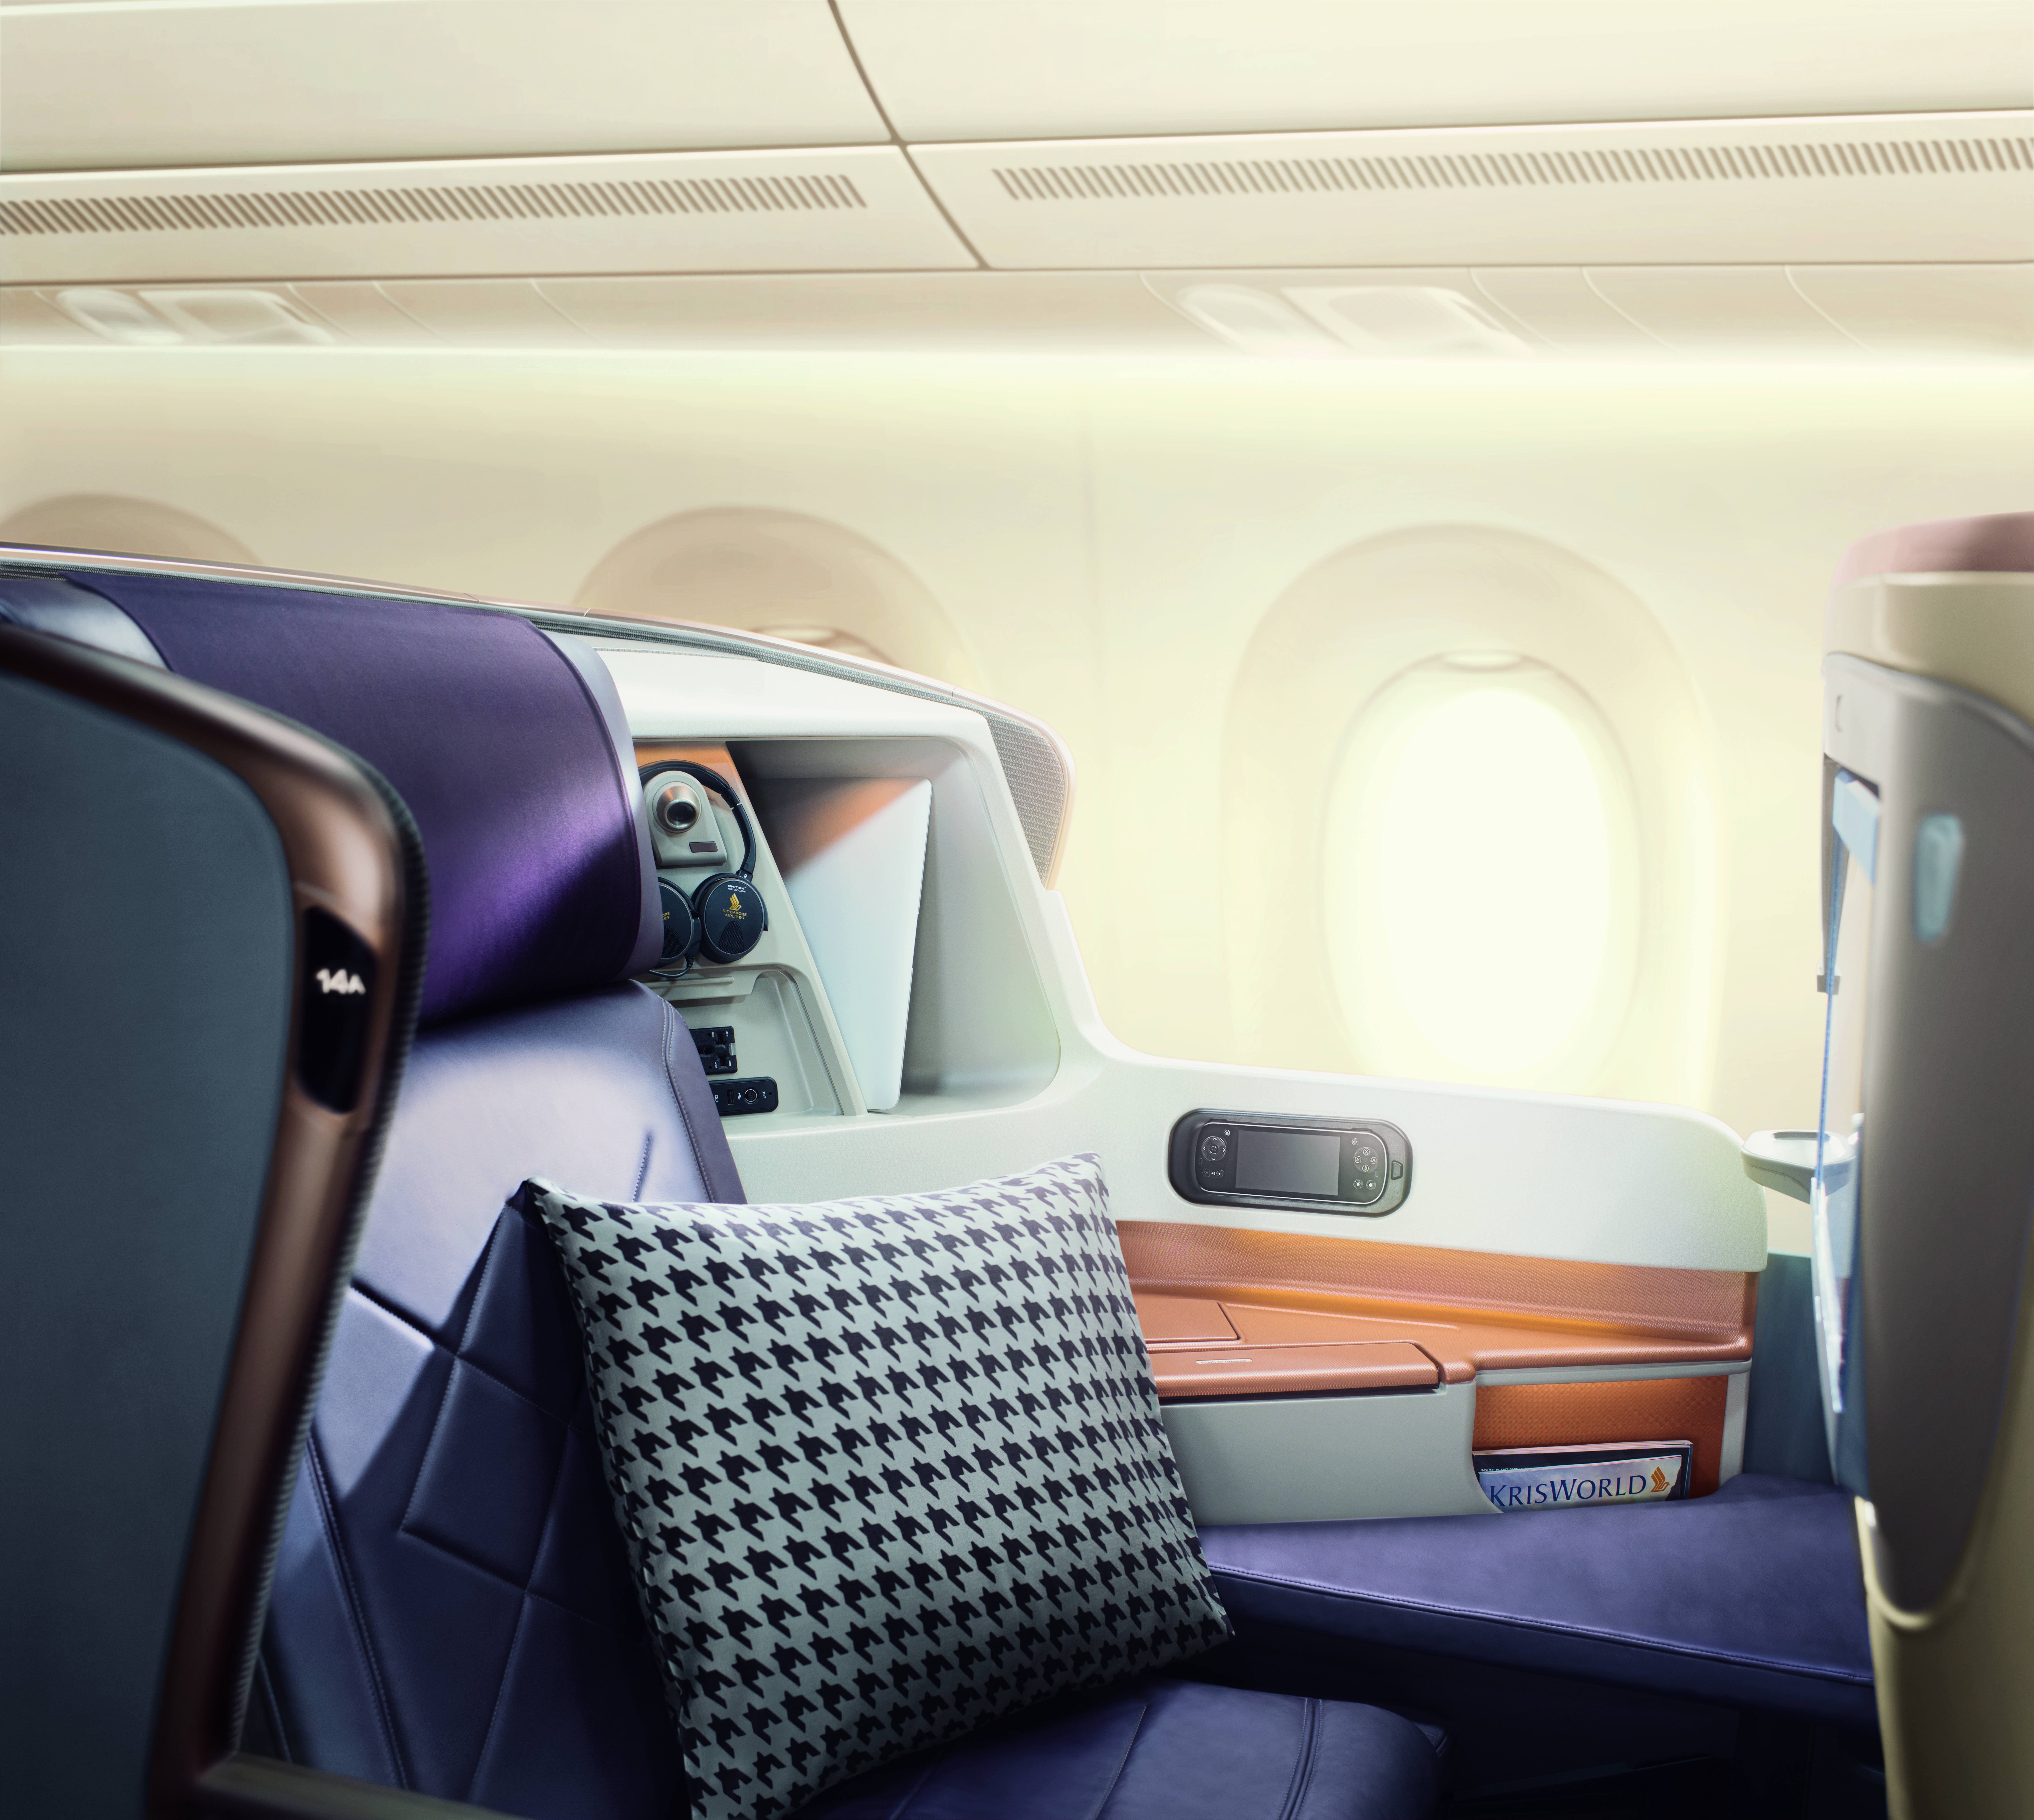 Singapore Airlines Business Class onboard the A350-900ULR that will fly non-stop between Newark and Singapore. Source: SIA